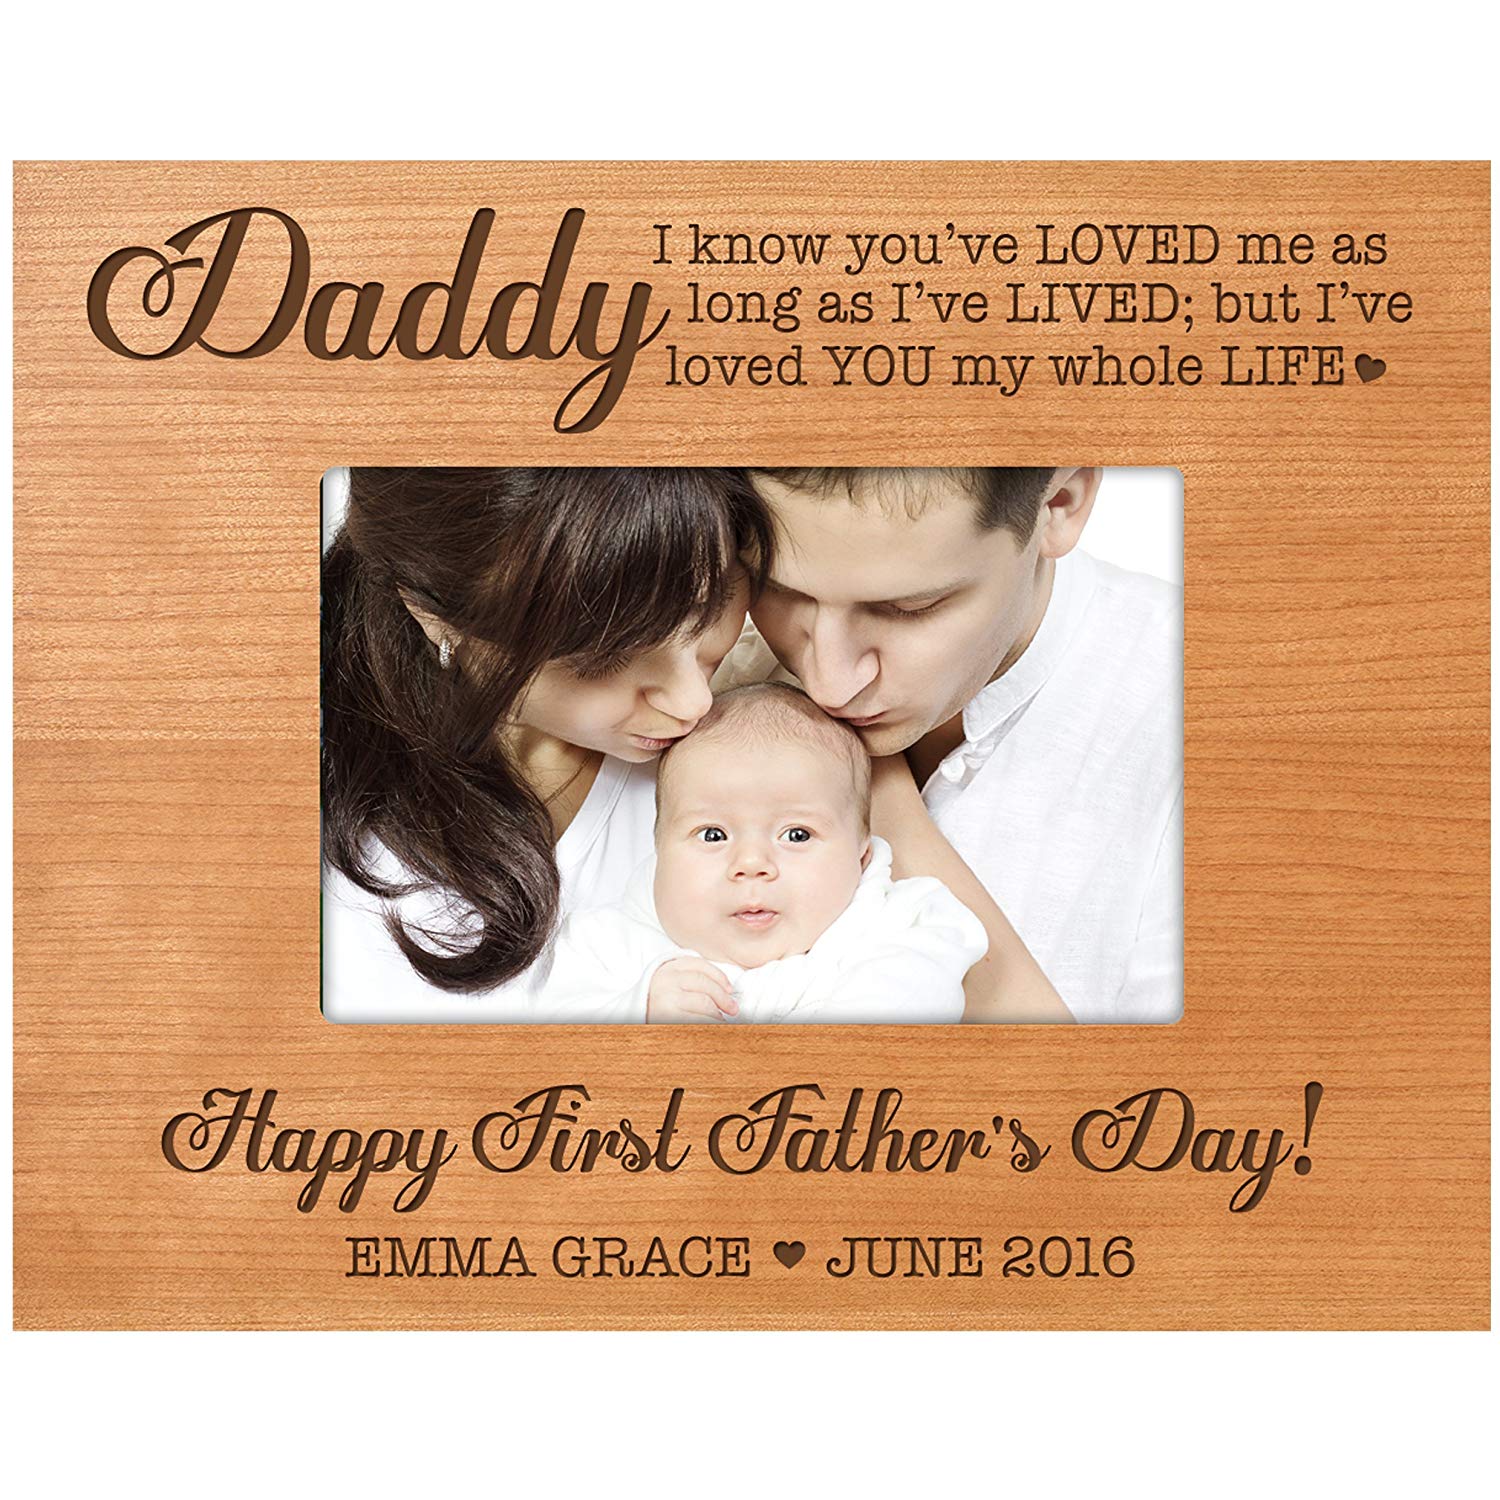 Personalized First Father's Day Photo Frame Gift - You Love Me - LifeSong Milestones